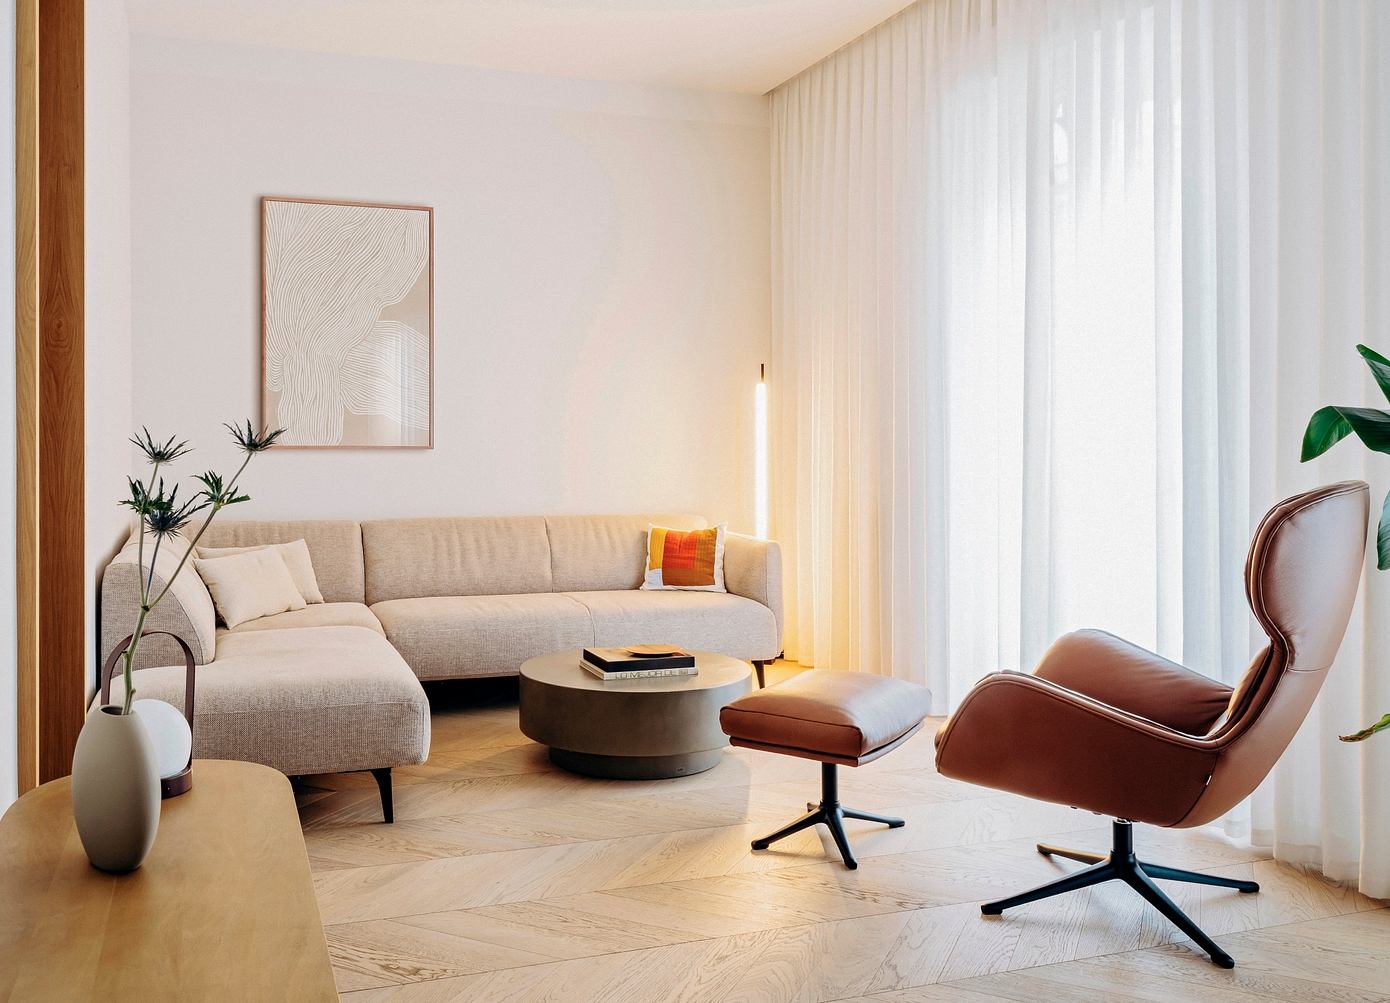 Antonio Acuña Apartment: Transforming Madrid Home with Natural Materials